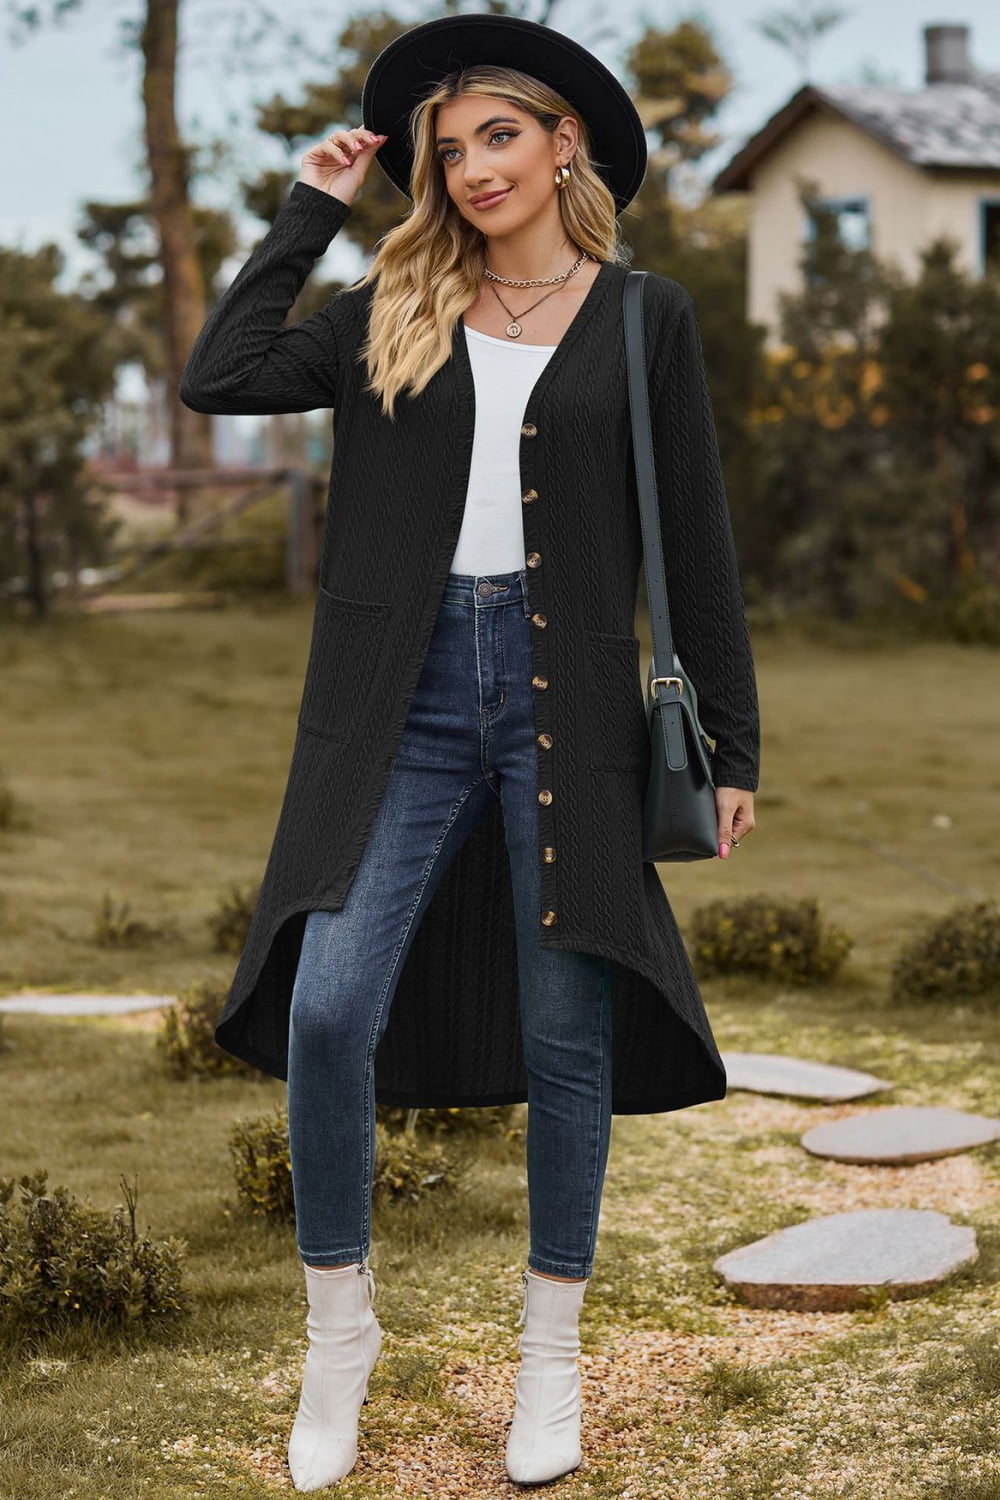 V-Neck Long Sleeve Cardigan with Pocket - Women’s Clothing & Accessories - Shirts & Tops - 20 - 2024